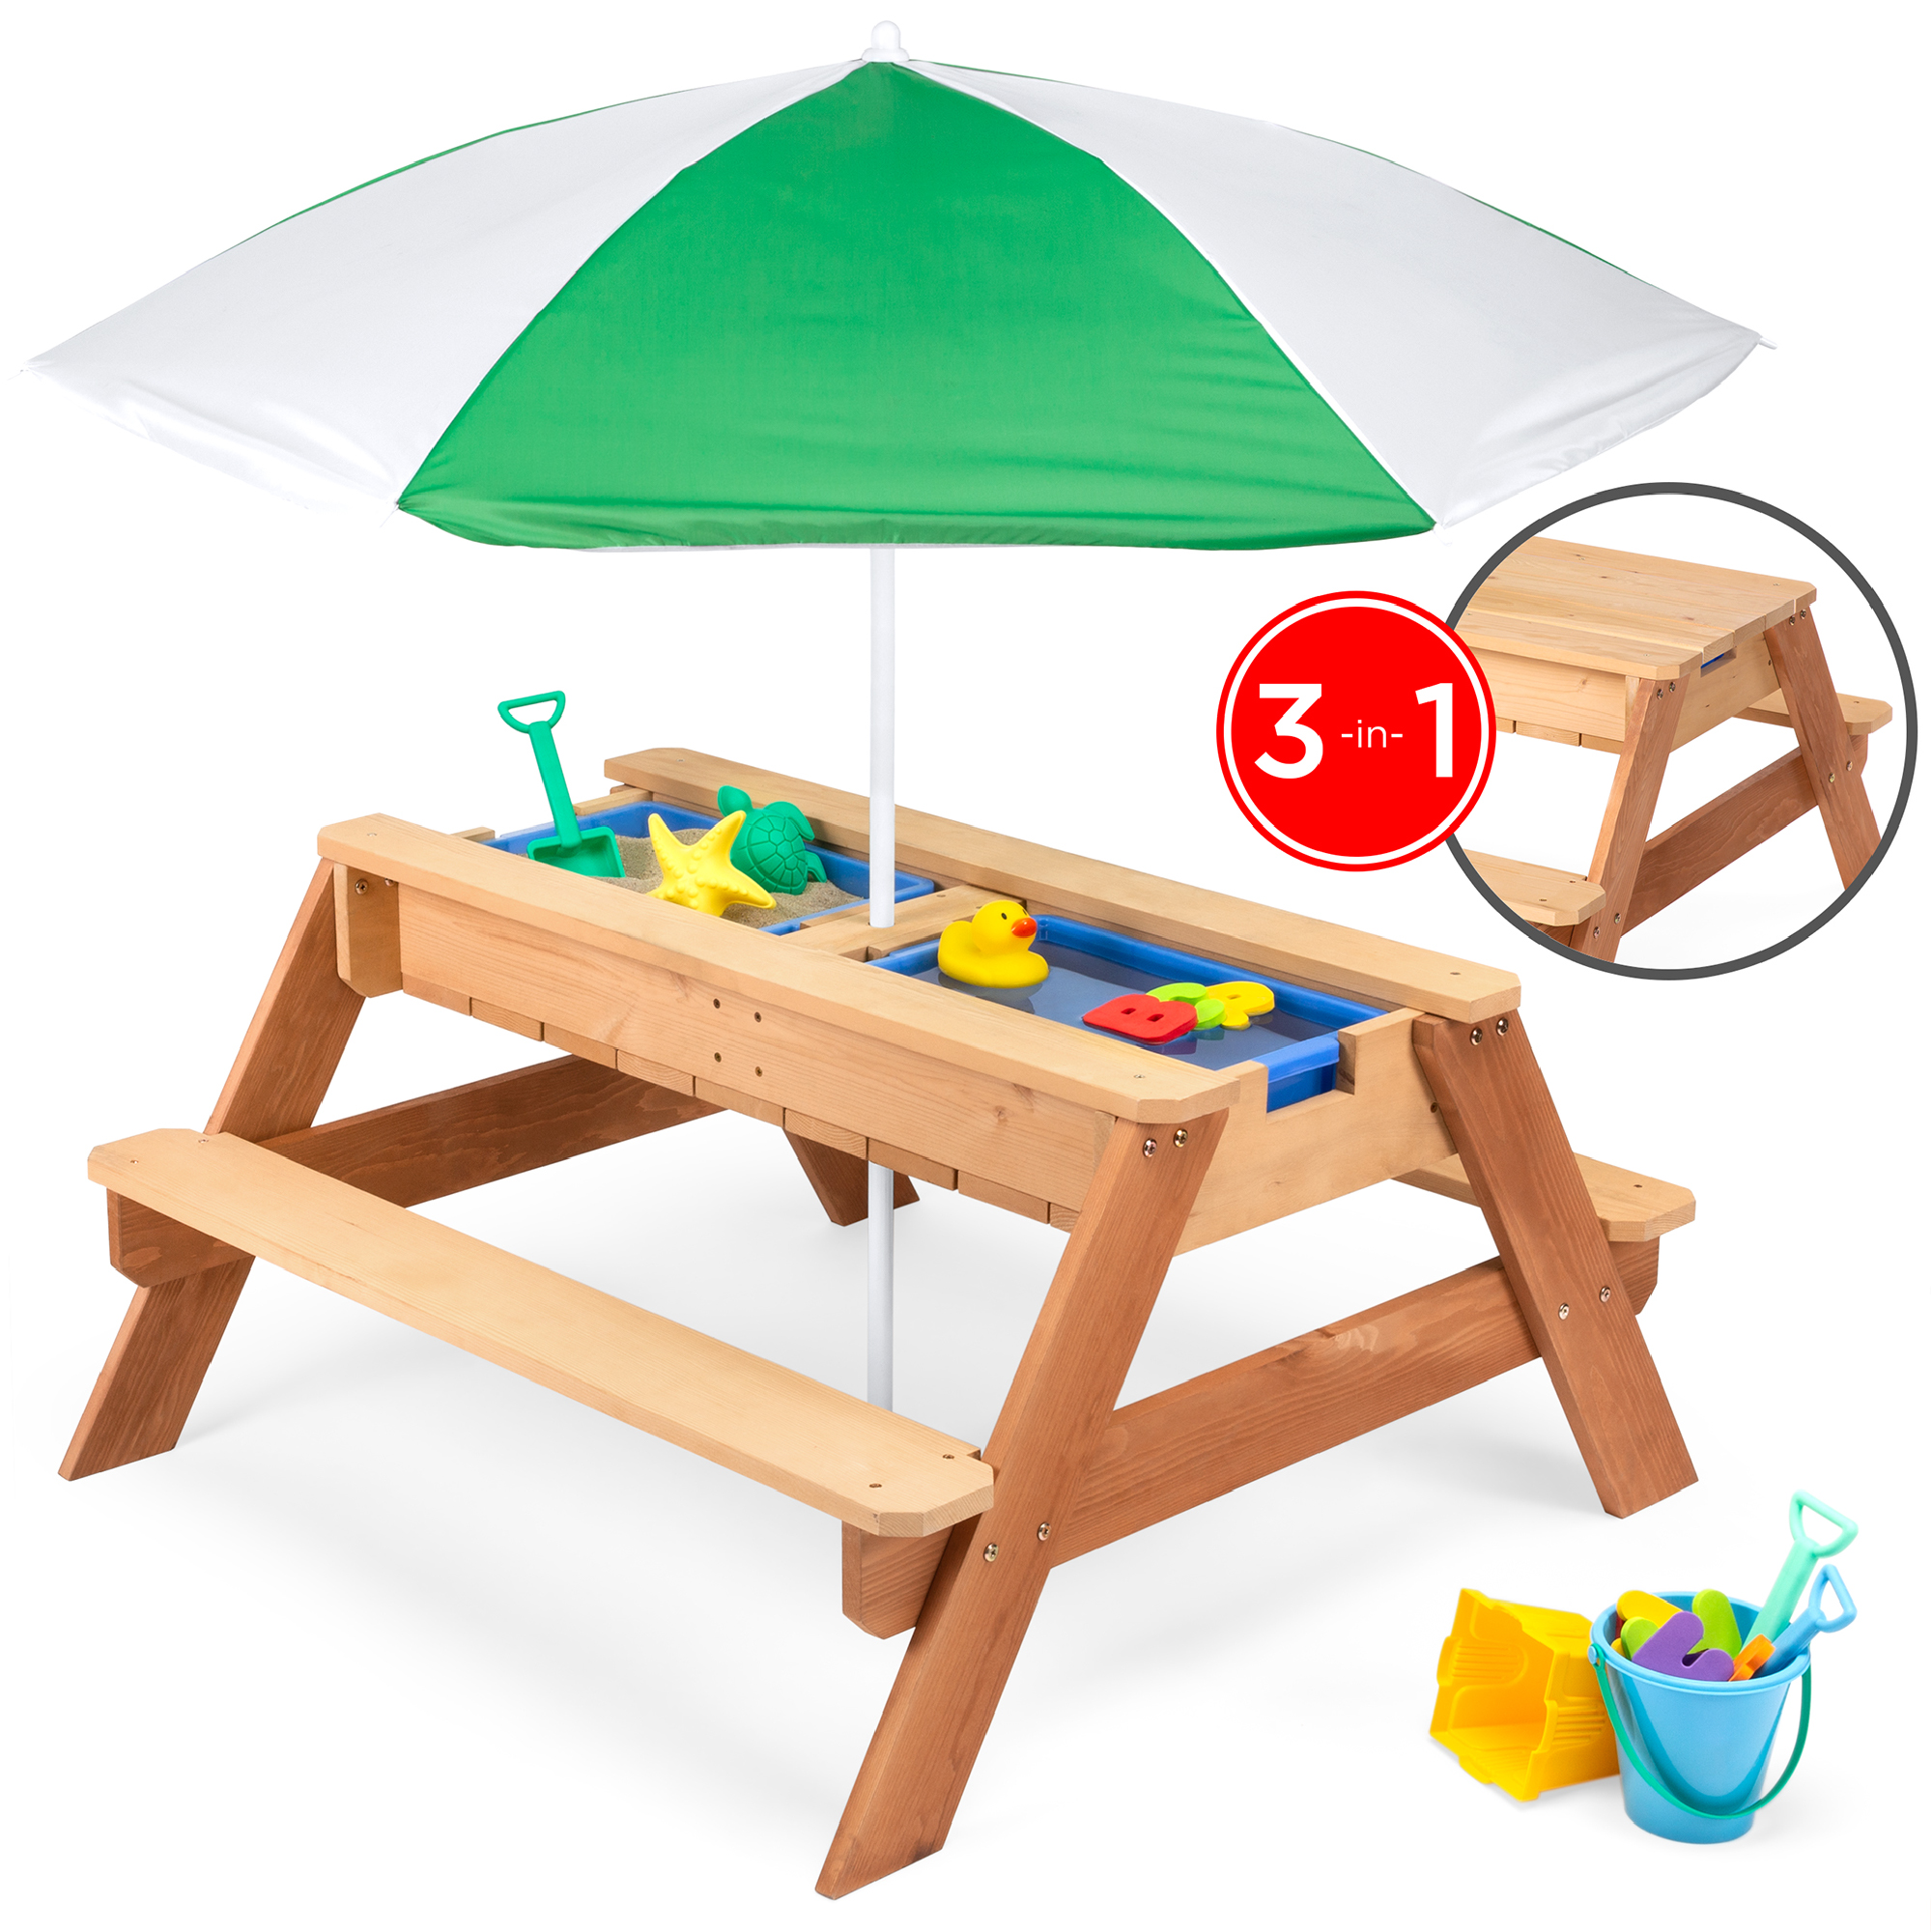 Best Choice Products Kids 3-in-1 Outdoor Convertible Wood Activity Sand & Water Picnic Table w/ Umbrella - Green - image 1 of 8